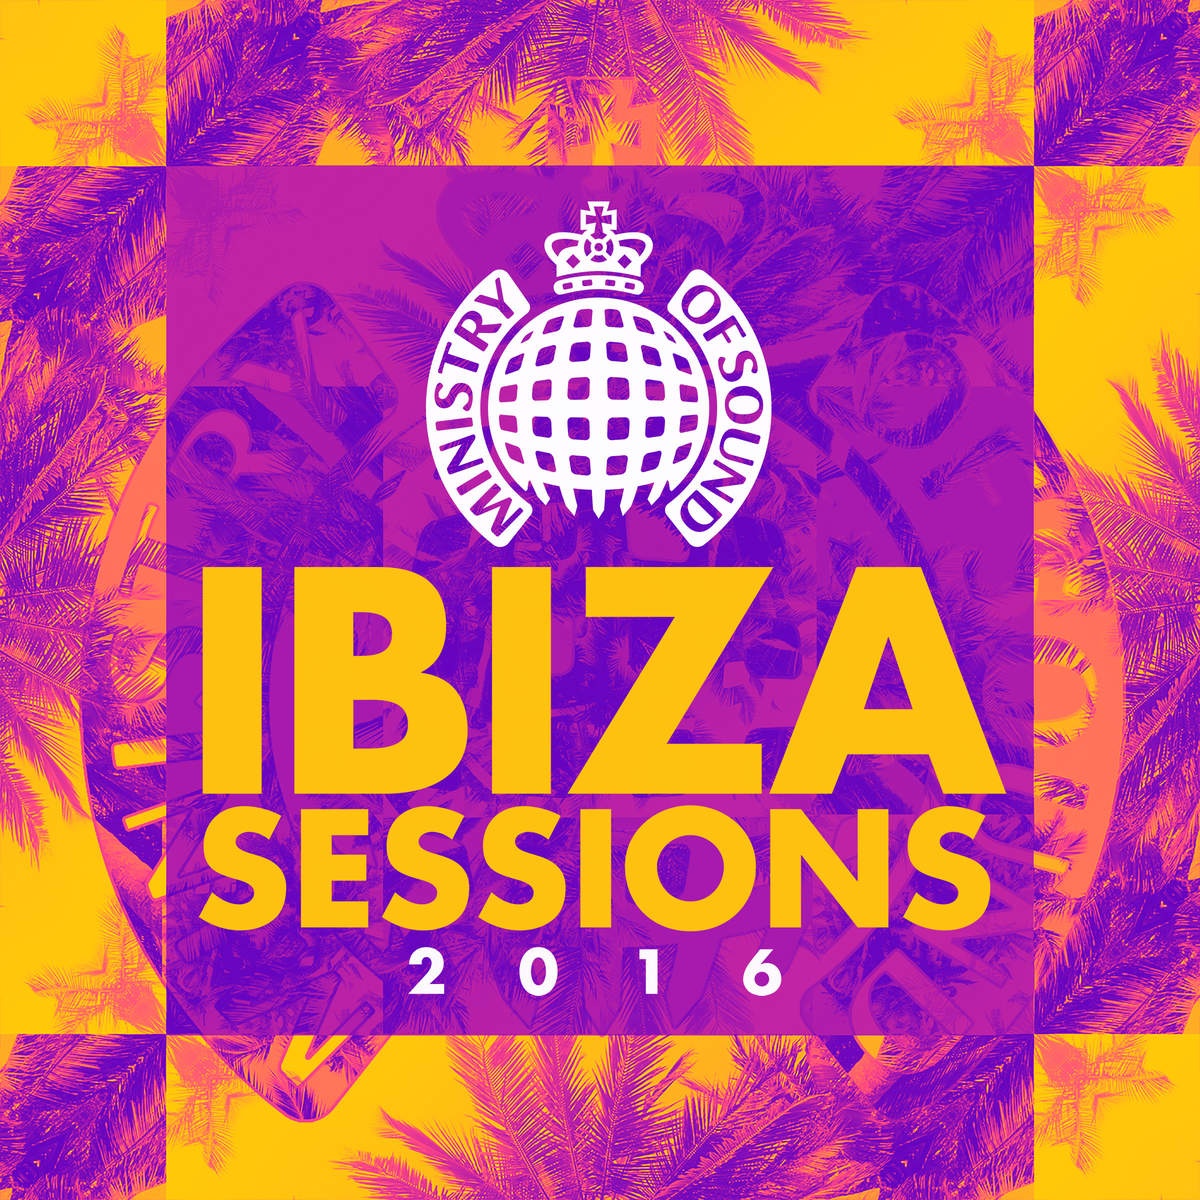 Ibiza Sessions 2016 - Ministry of Sound